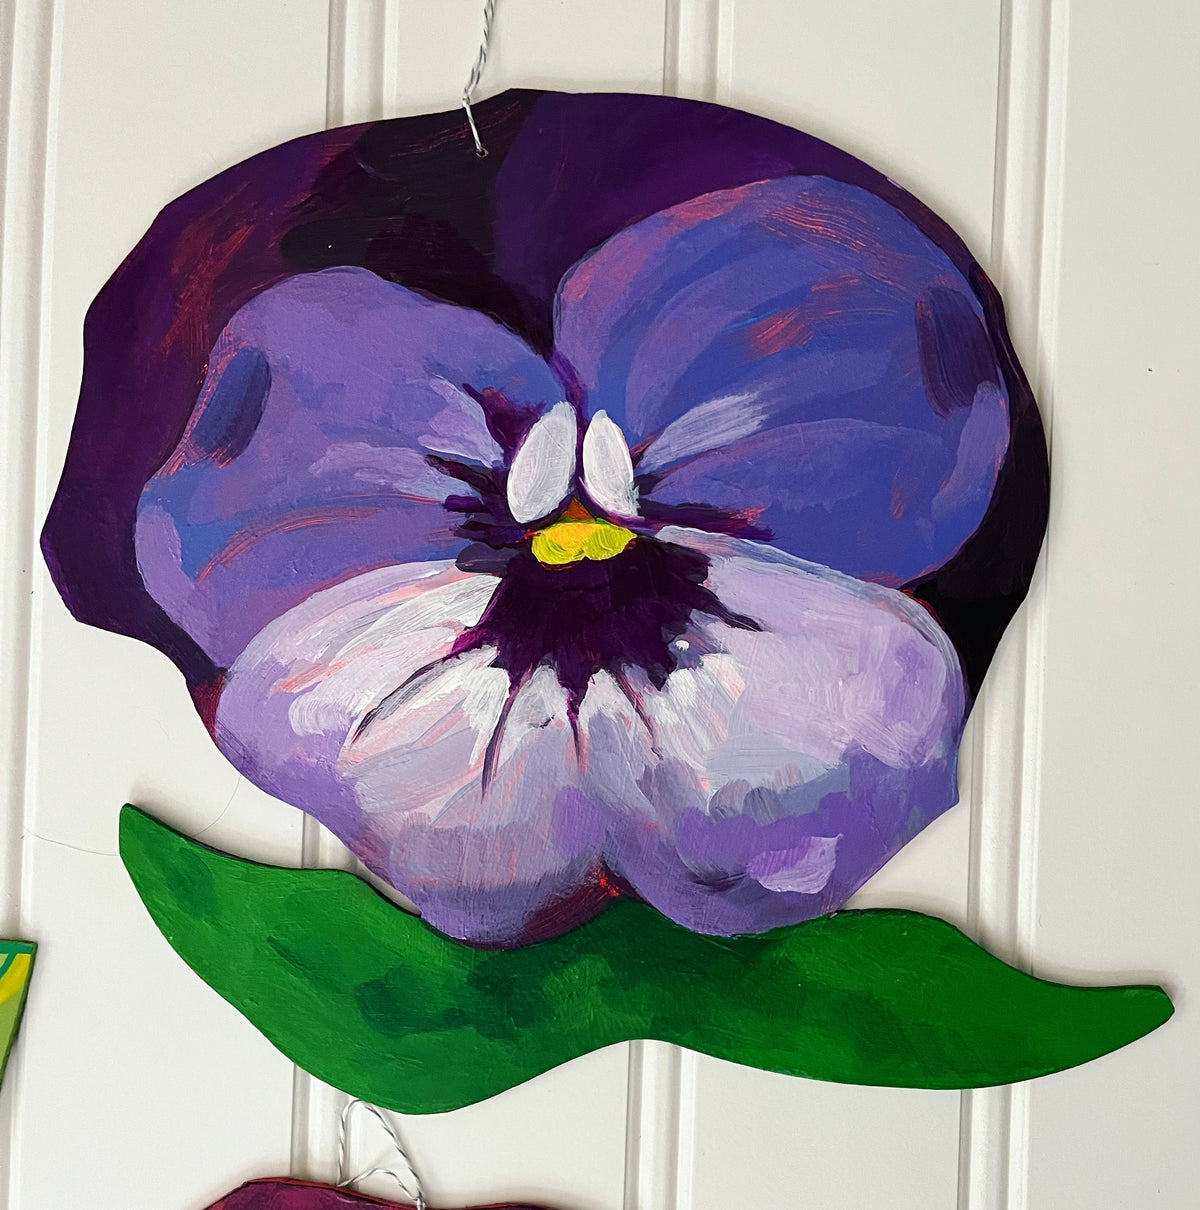 cutout wooden flower painting, by artist Abigail Gray Swartz. Purple pansy flower, acrylic on panel.